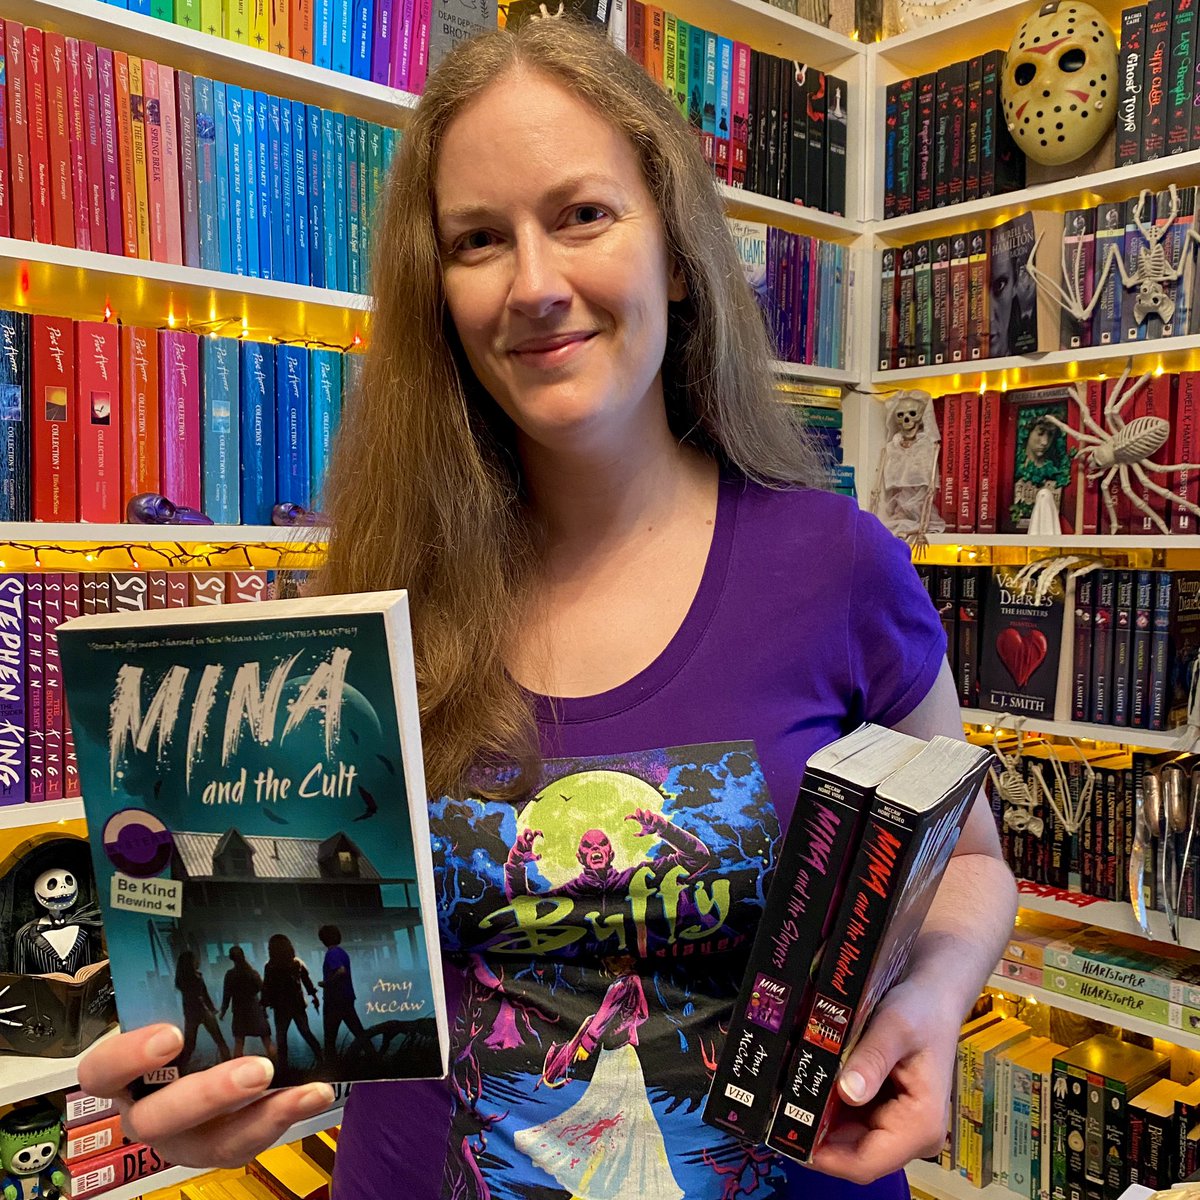 I can’t believe publication day is here and Mina and the Cult is finally out in the world! Thank you so much to everyone who worked on this book and to the readers who post about my books online, especially Team Mina. It makes such a difference!